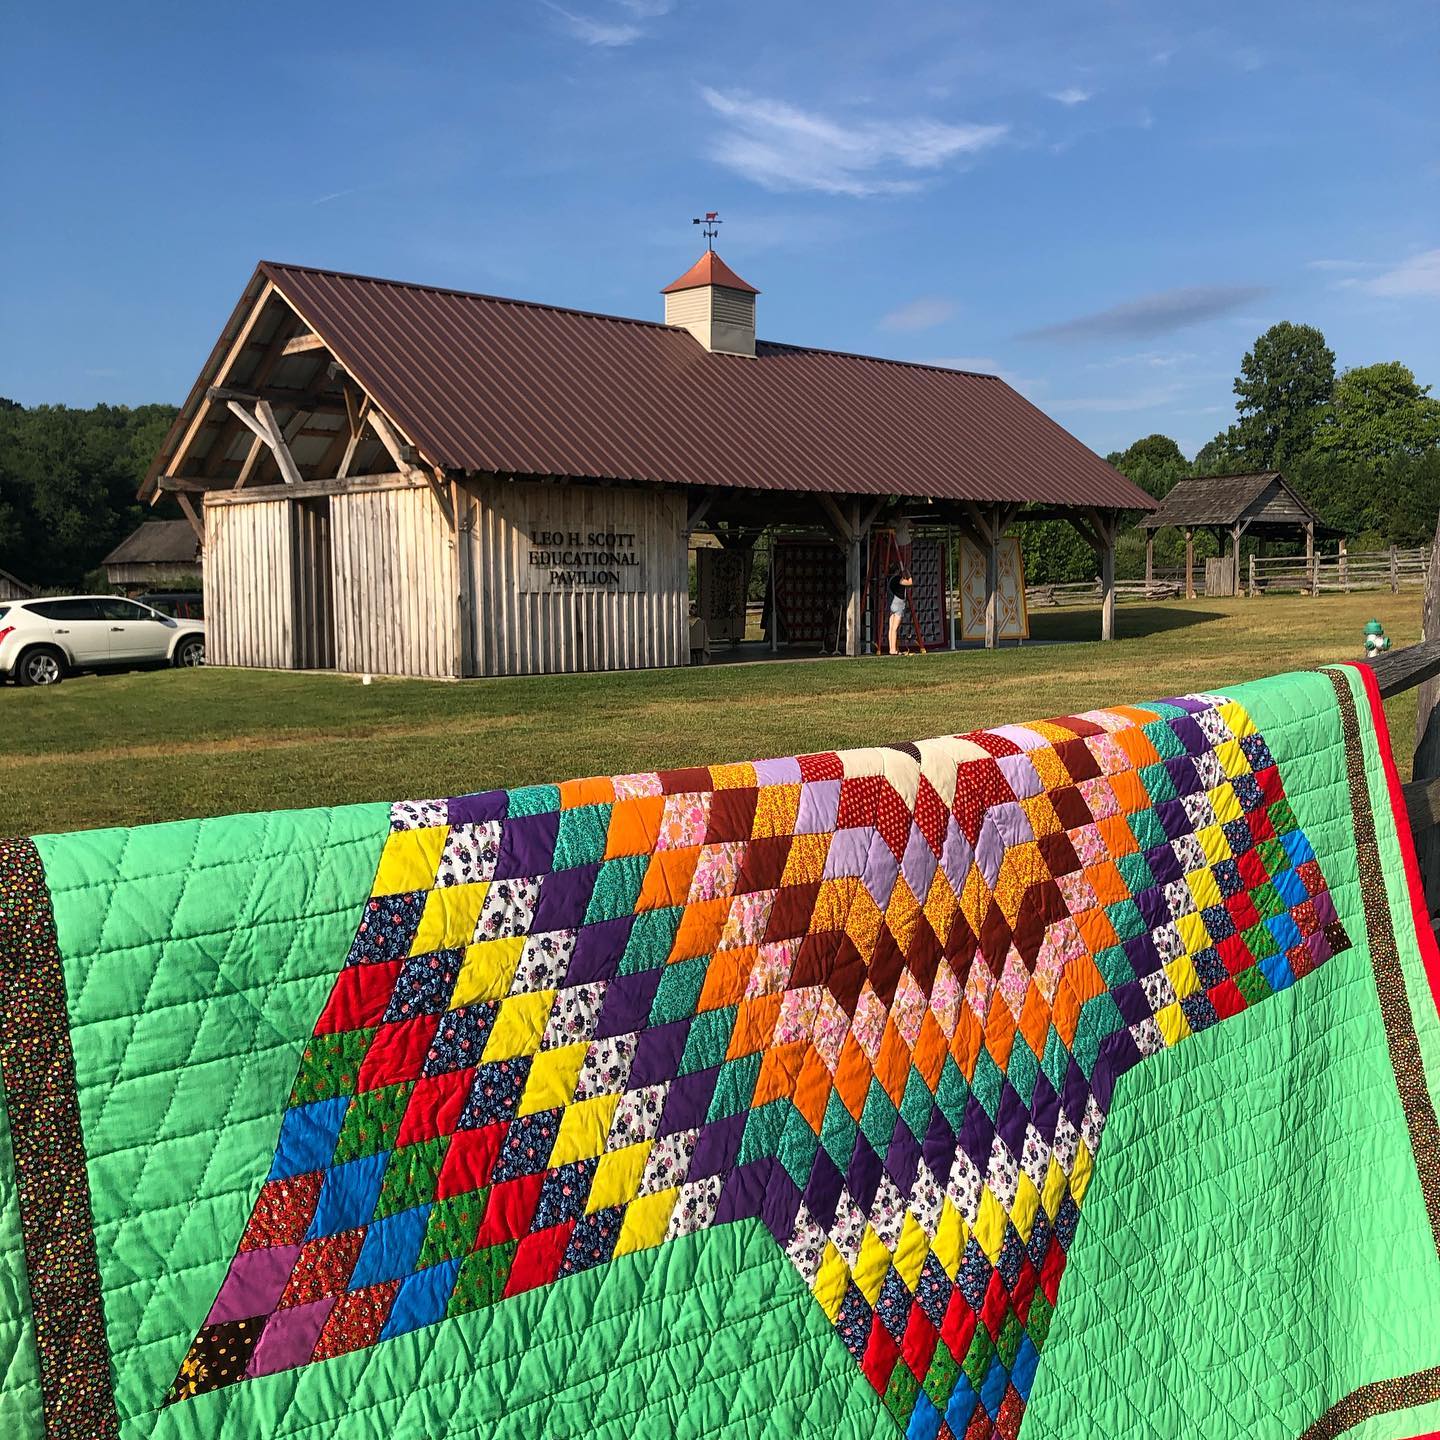 A quilt draped over a fence with a wooden building in the background.